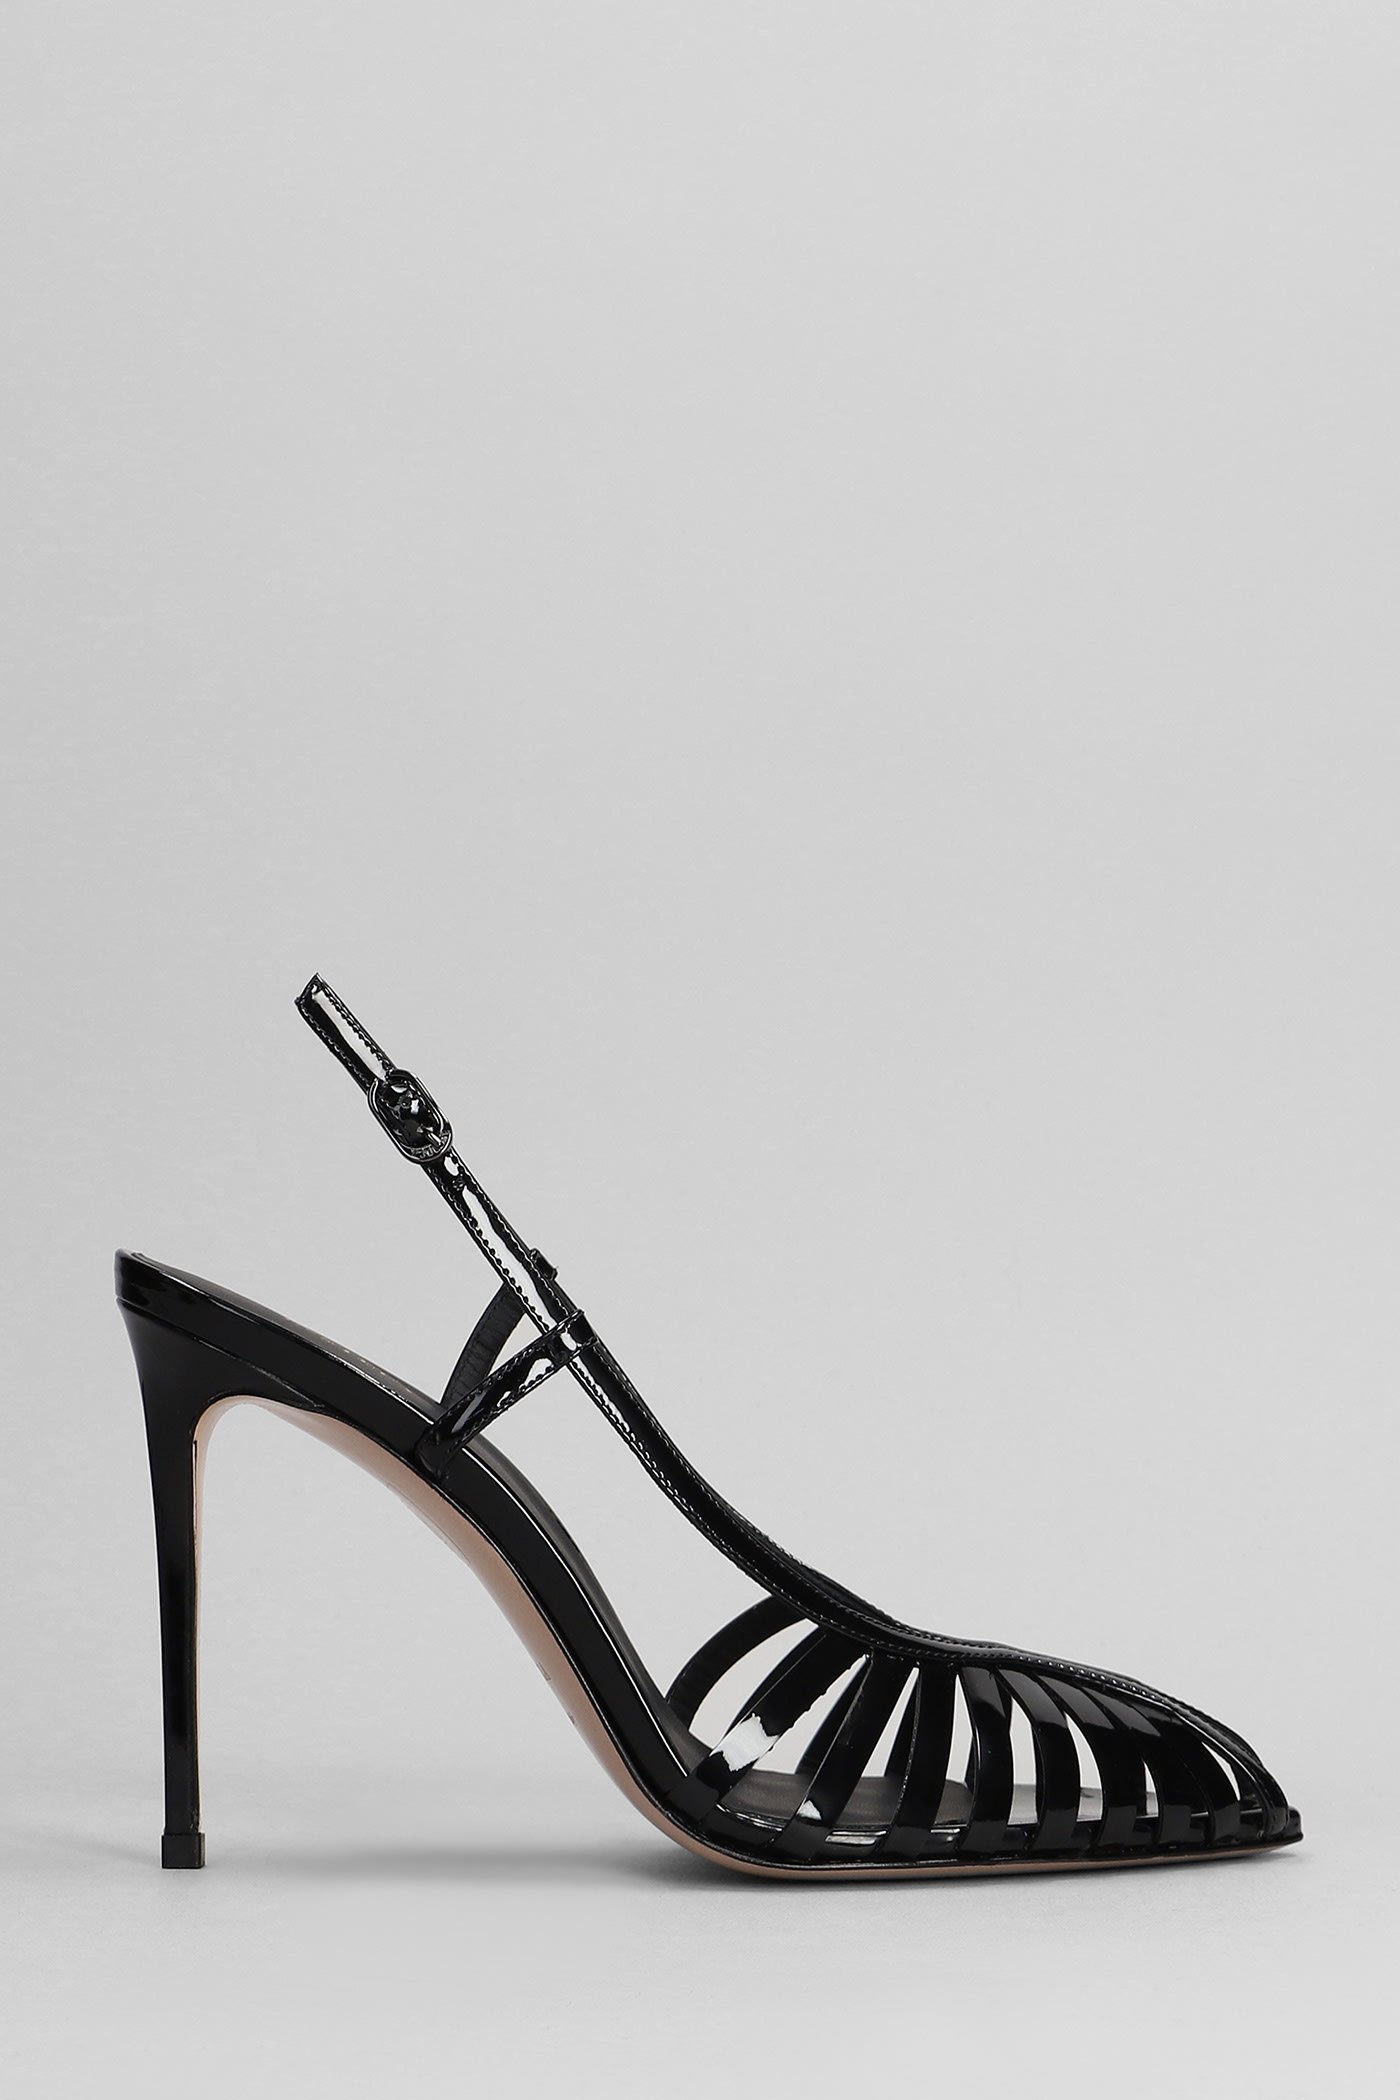 Cage Sandals In Black Patent Leather